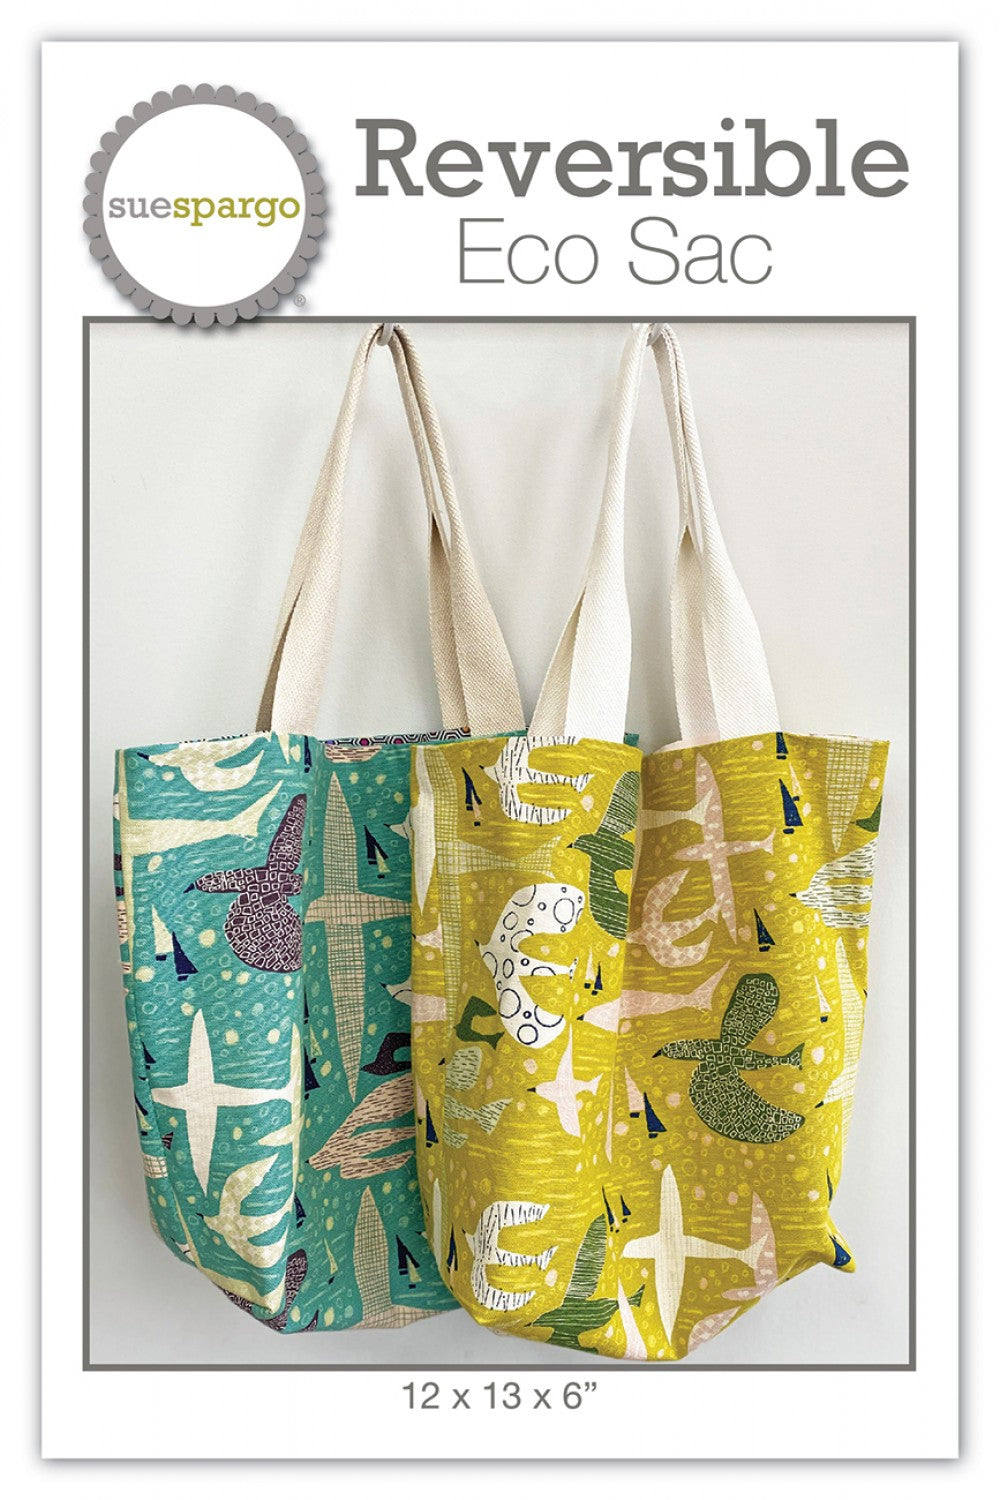 Eco Sac - Applique, Embroidery, and Sewing Pattern by Sue Spargo of Folk Art Quilts